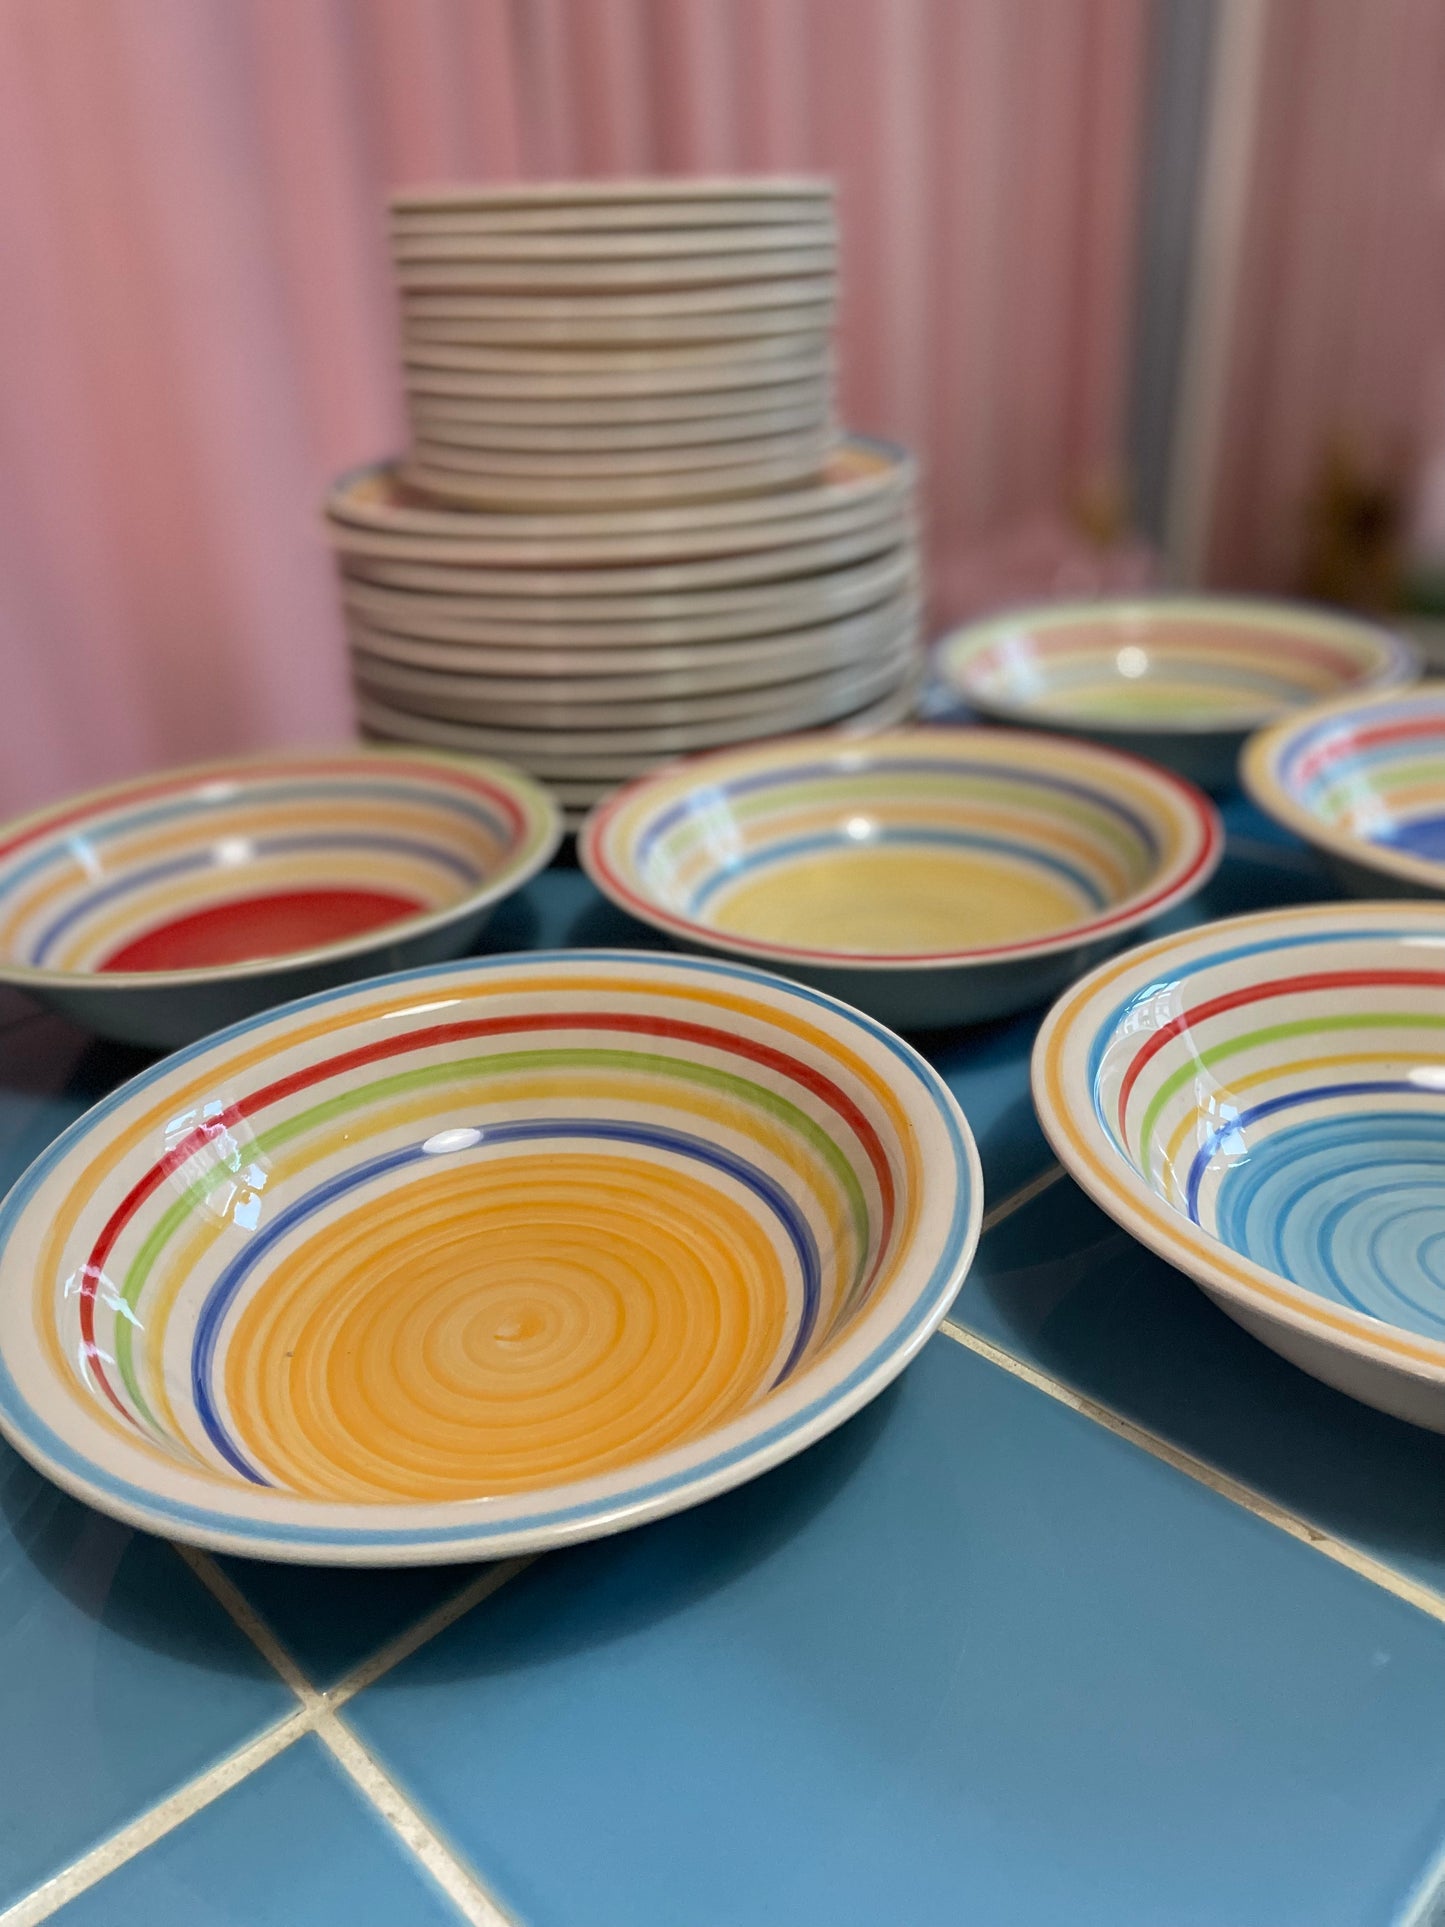 Colorful deep plates for 6 people